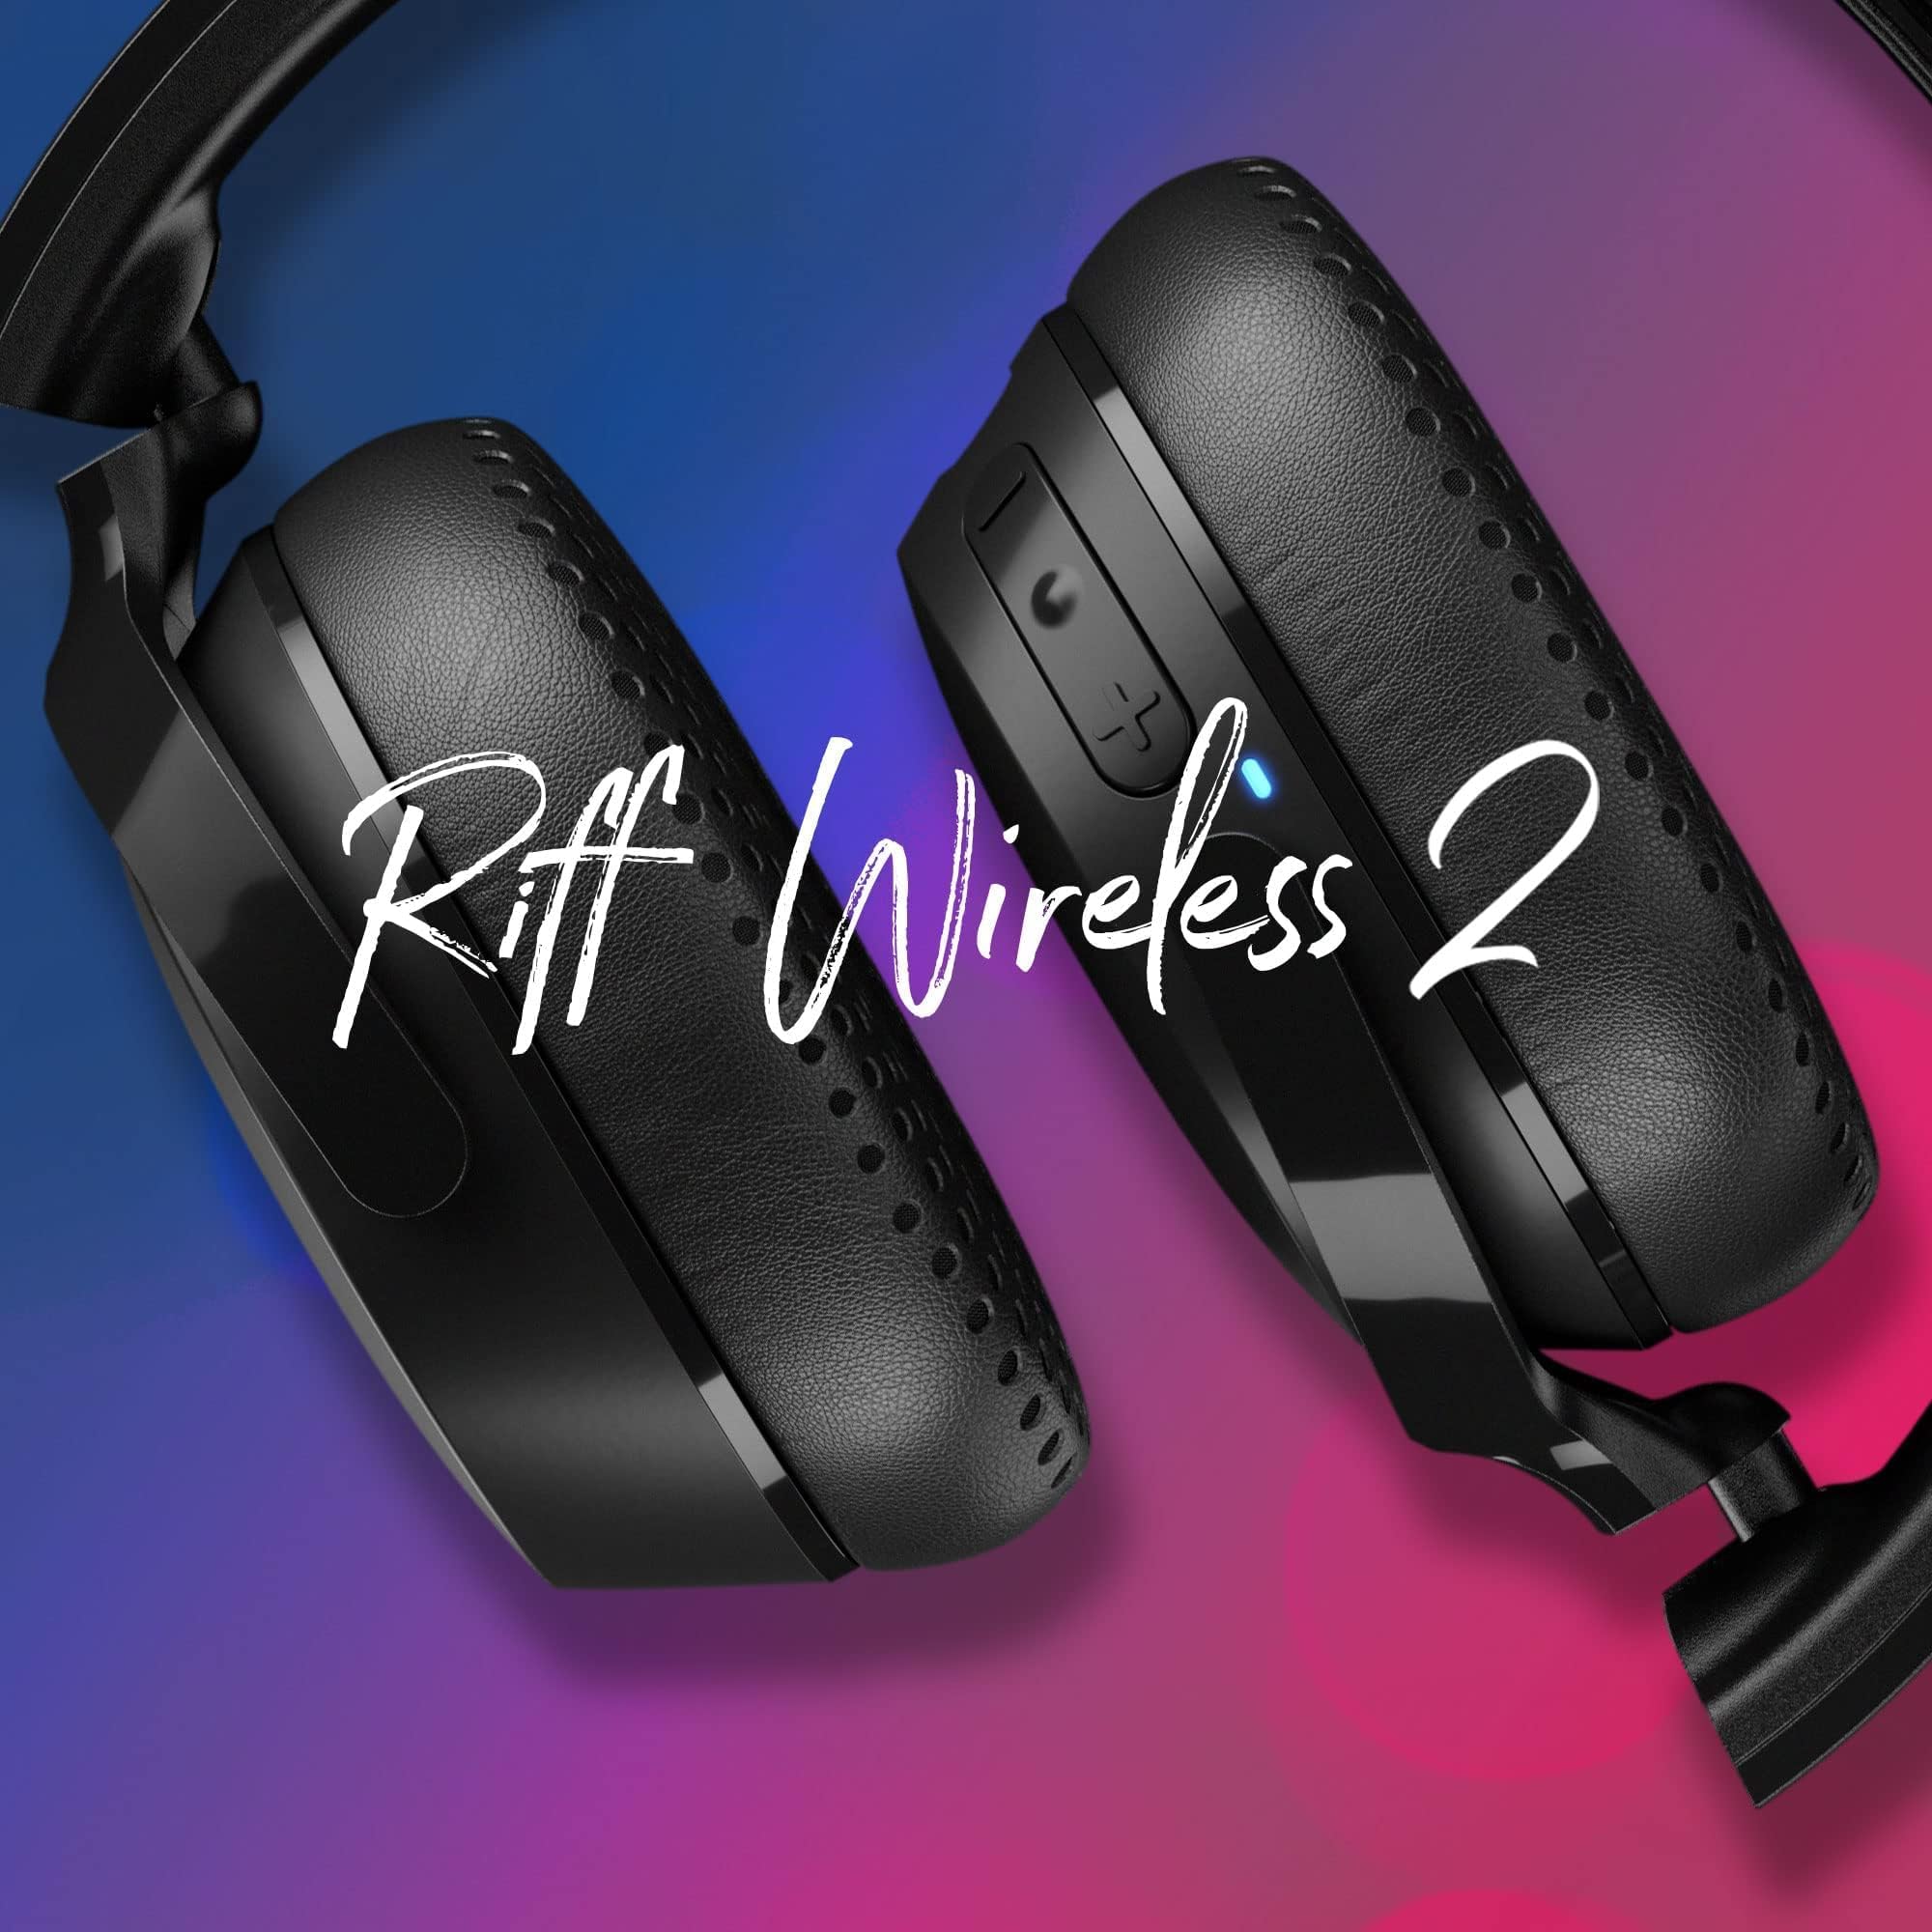 Skullcandy Riff 2 On-Ear Wireless Headphones, 34 Hr Battery, Microphone, Works with iPhone Android and Bluetooth Devices - Black